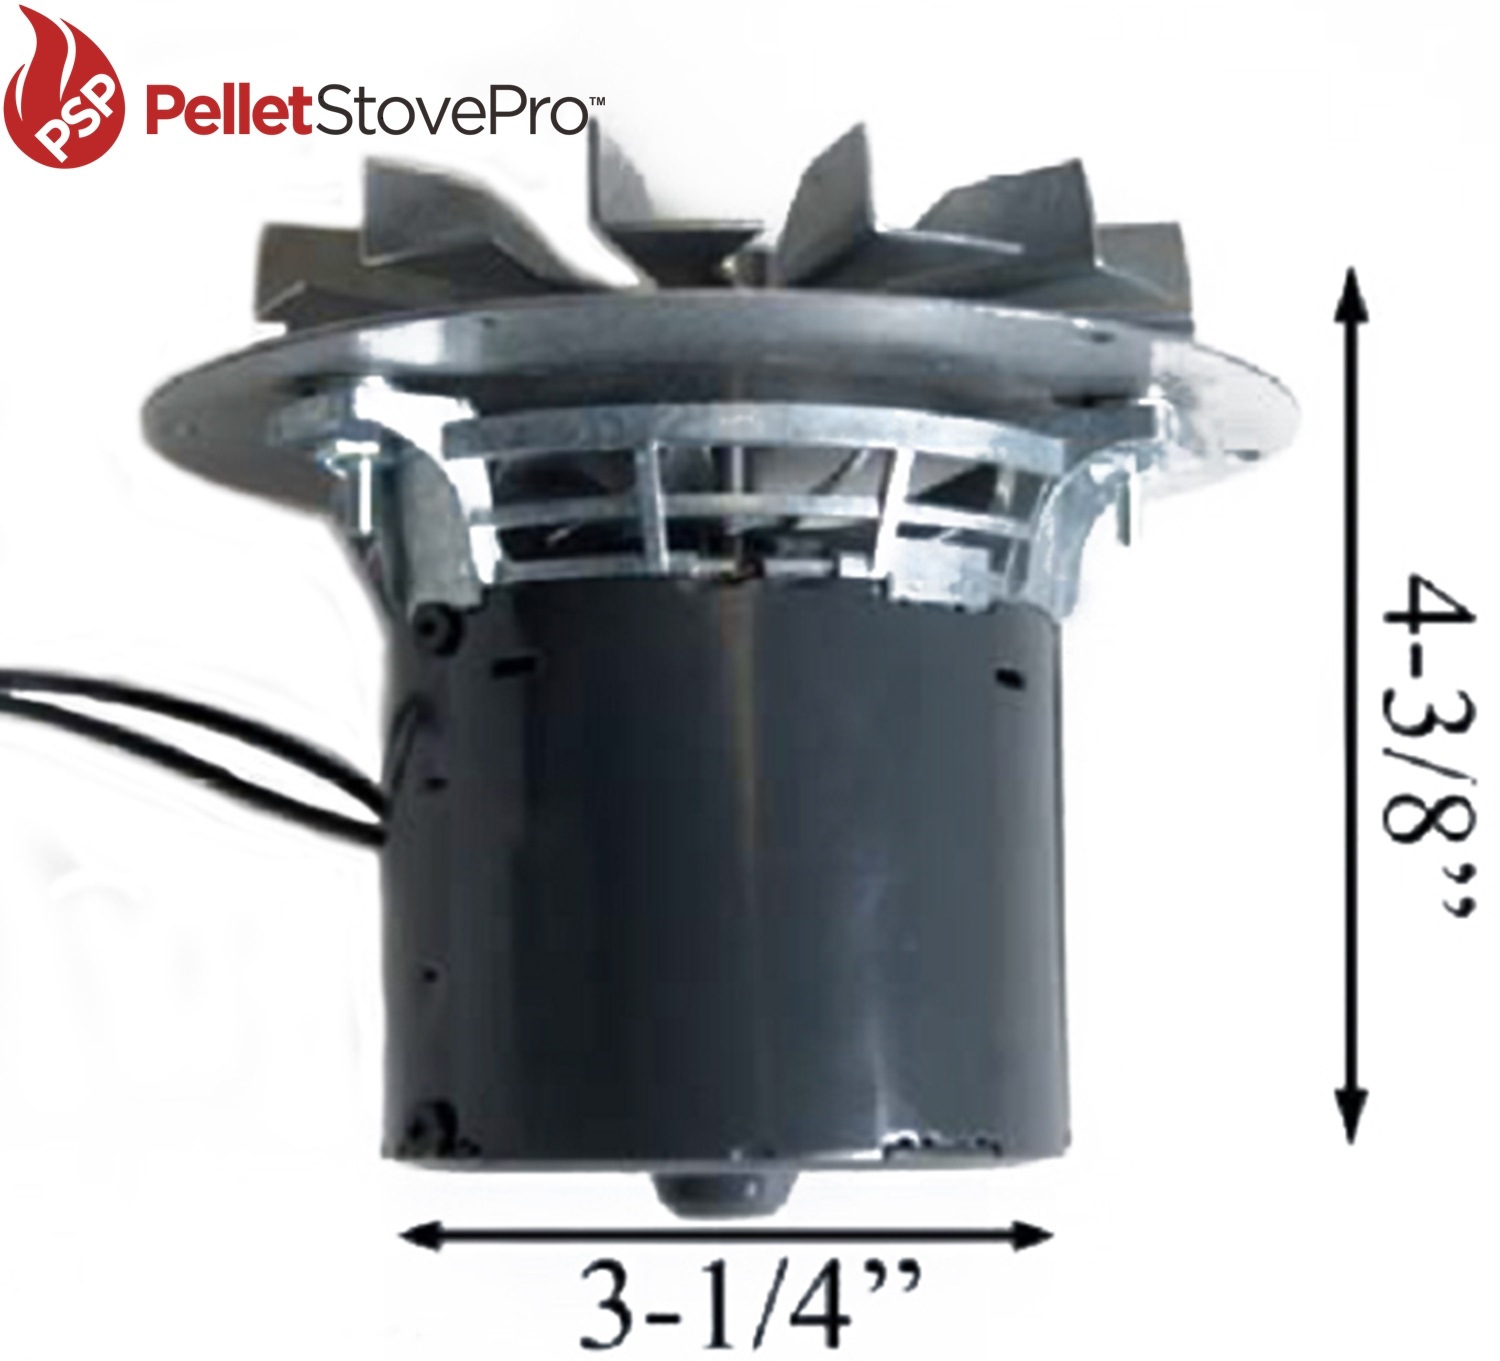 Where can you find parts for Pelpro stoves?